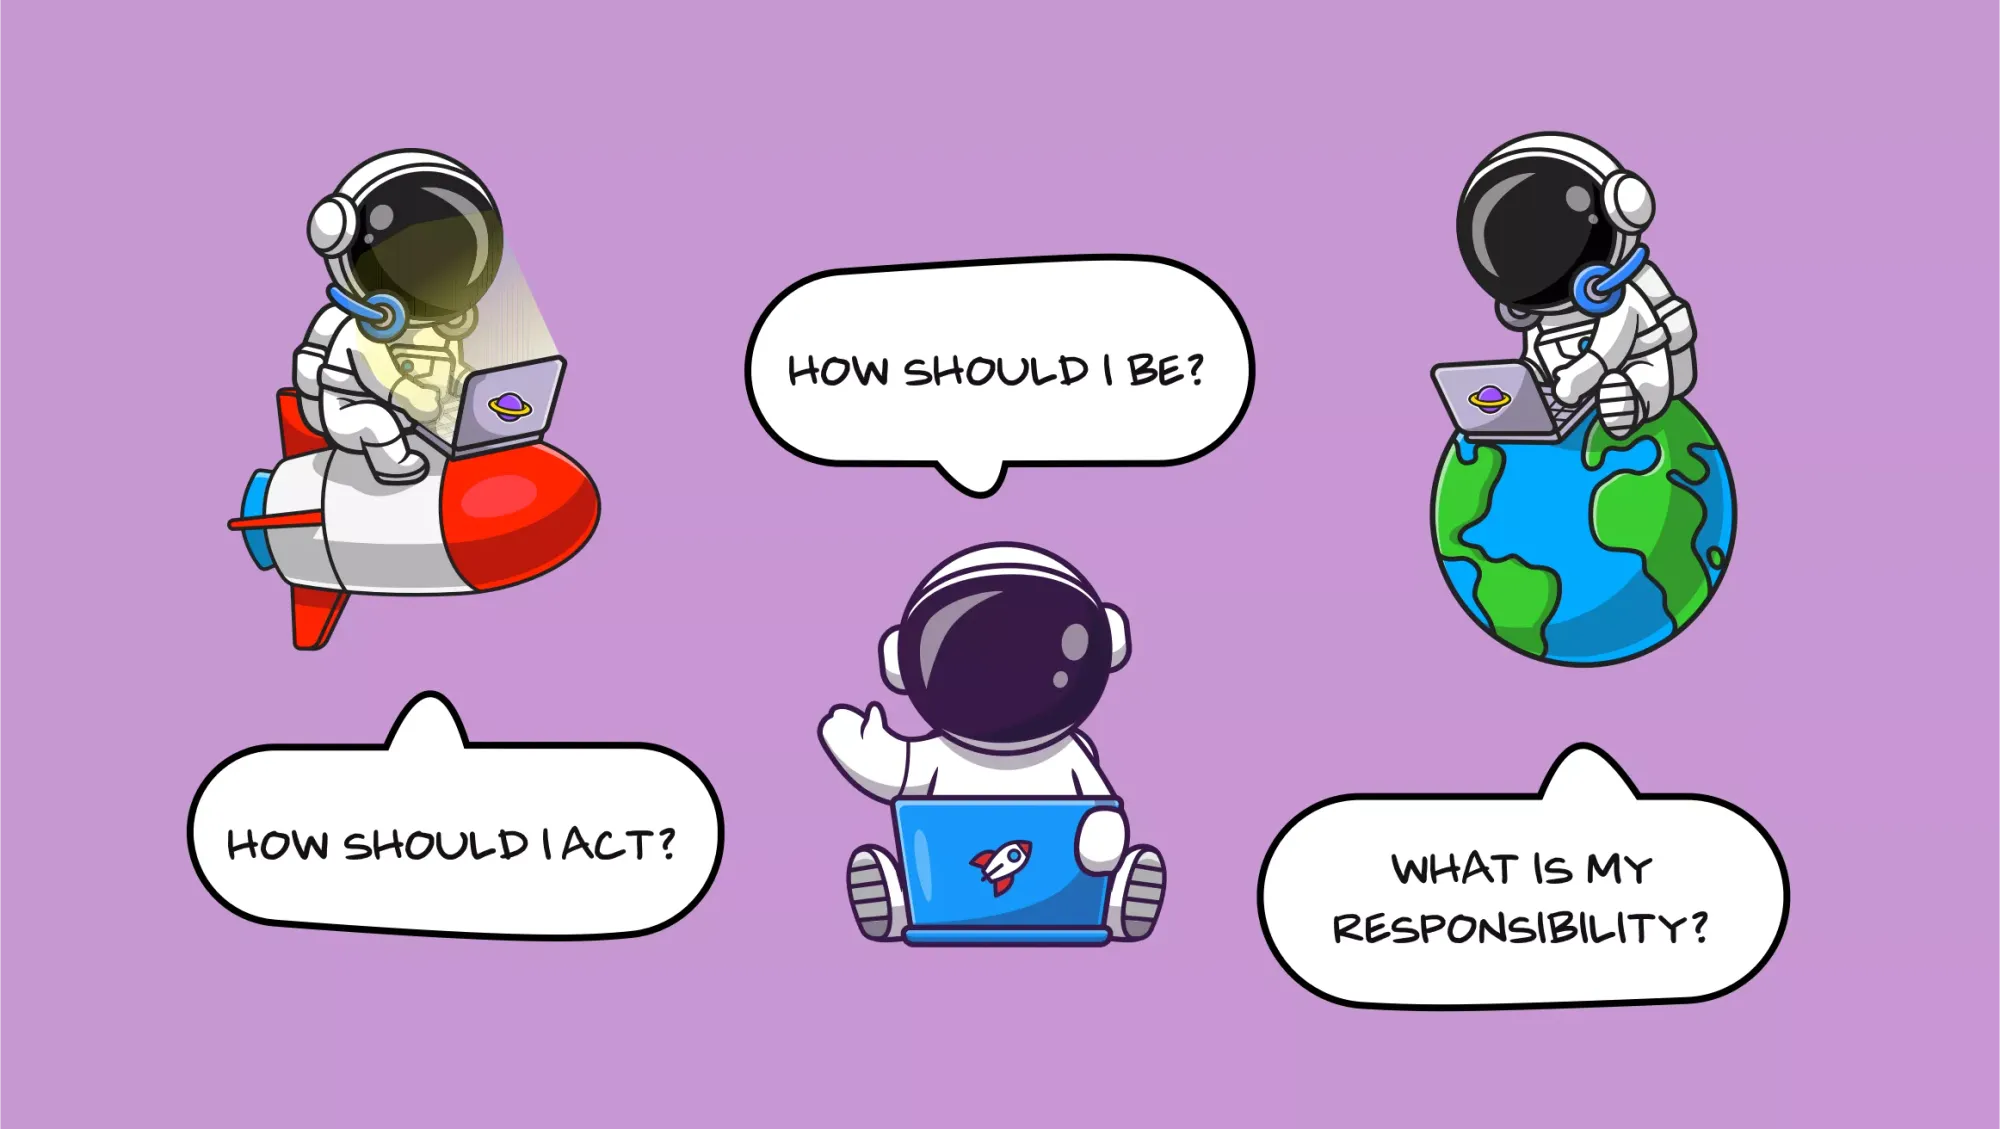 Illustration of 3 astronauts asking How should I act, How should I be and What is my responsibility.